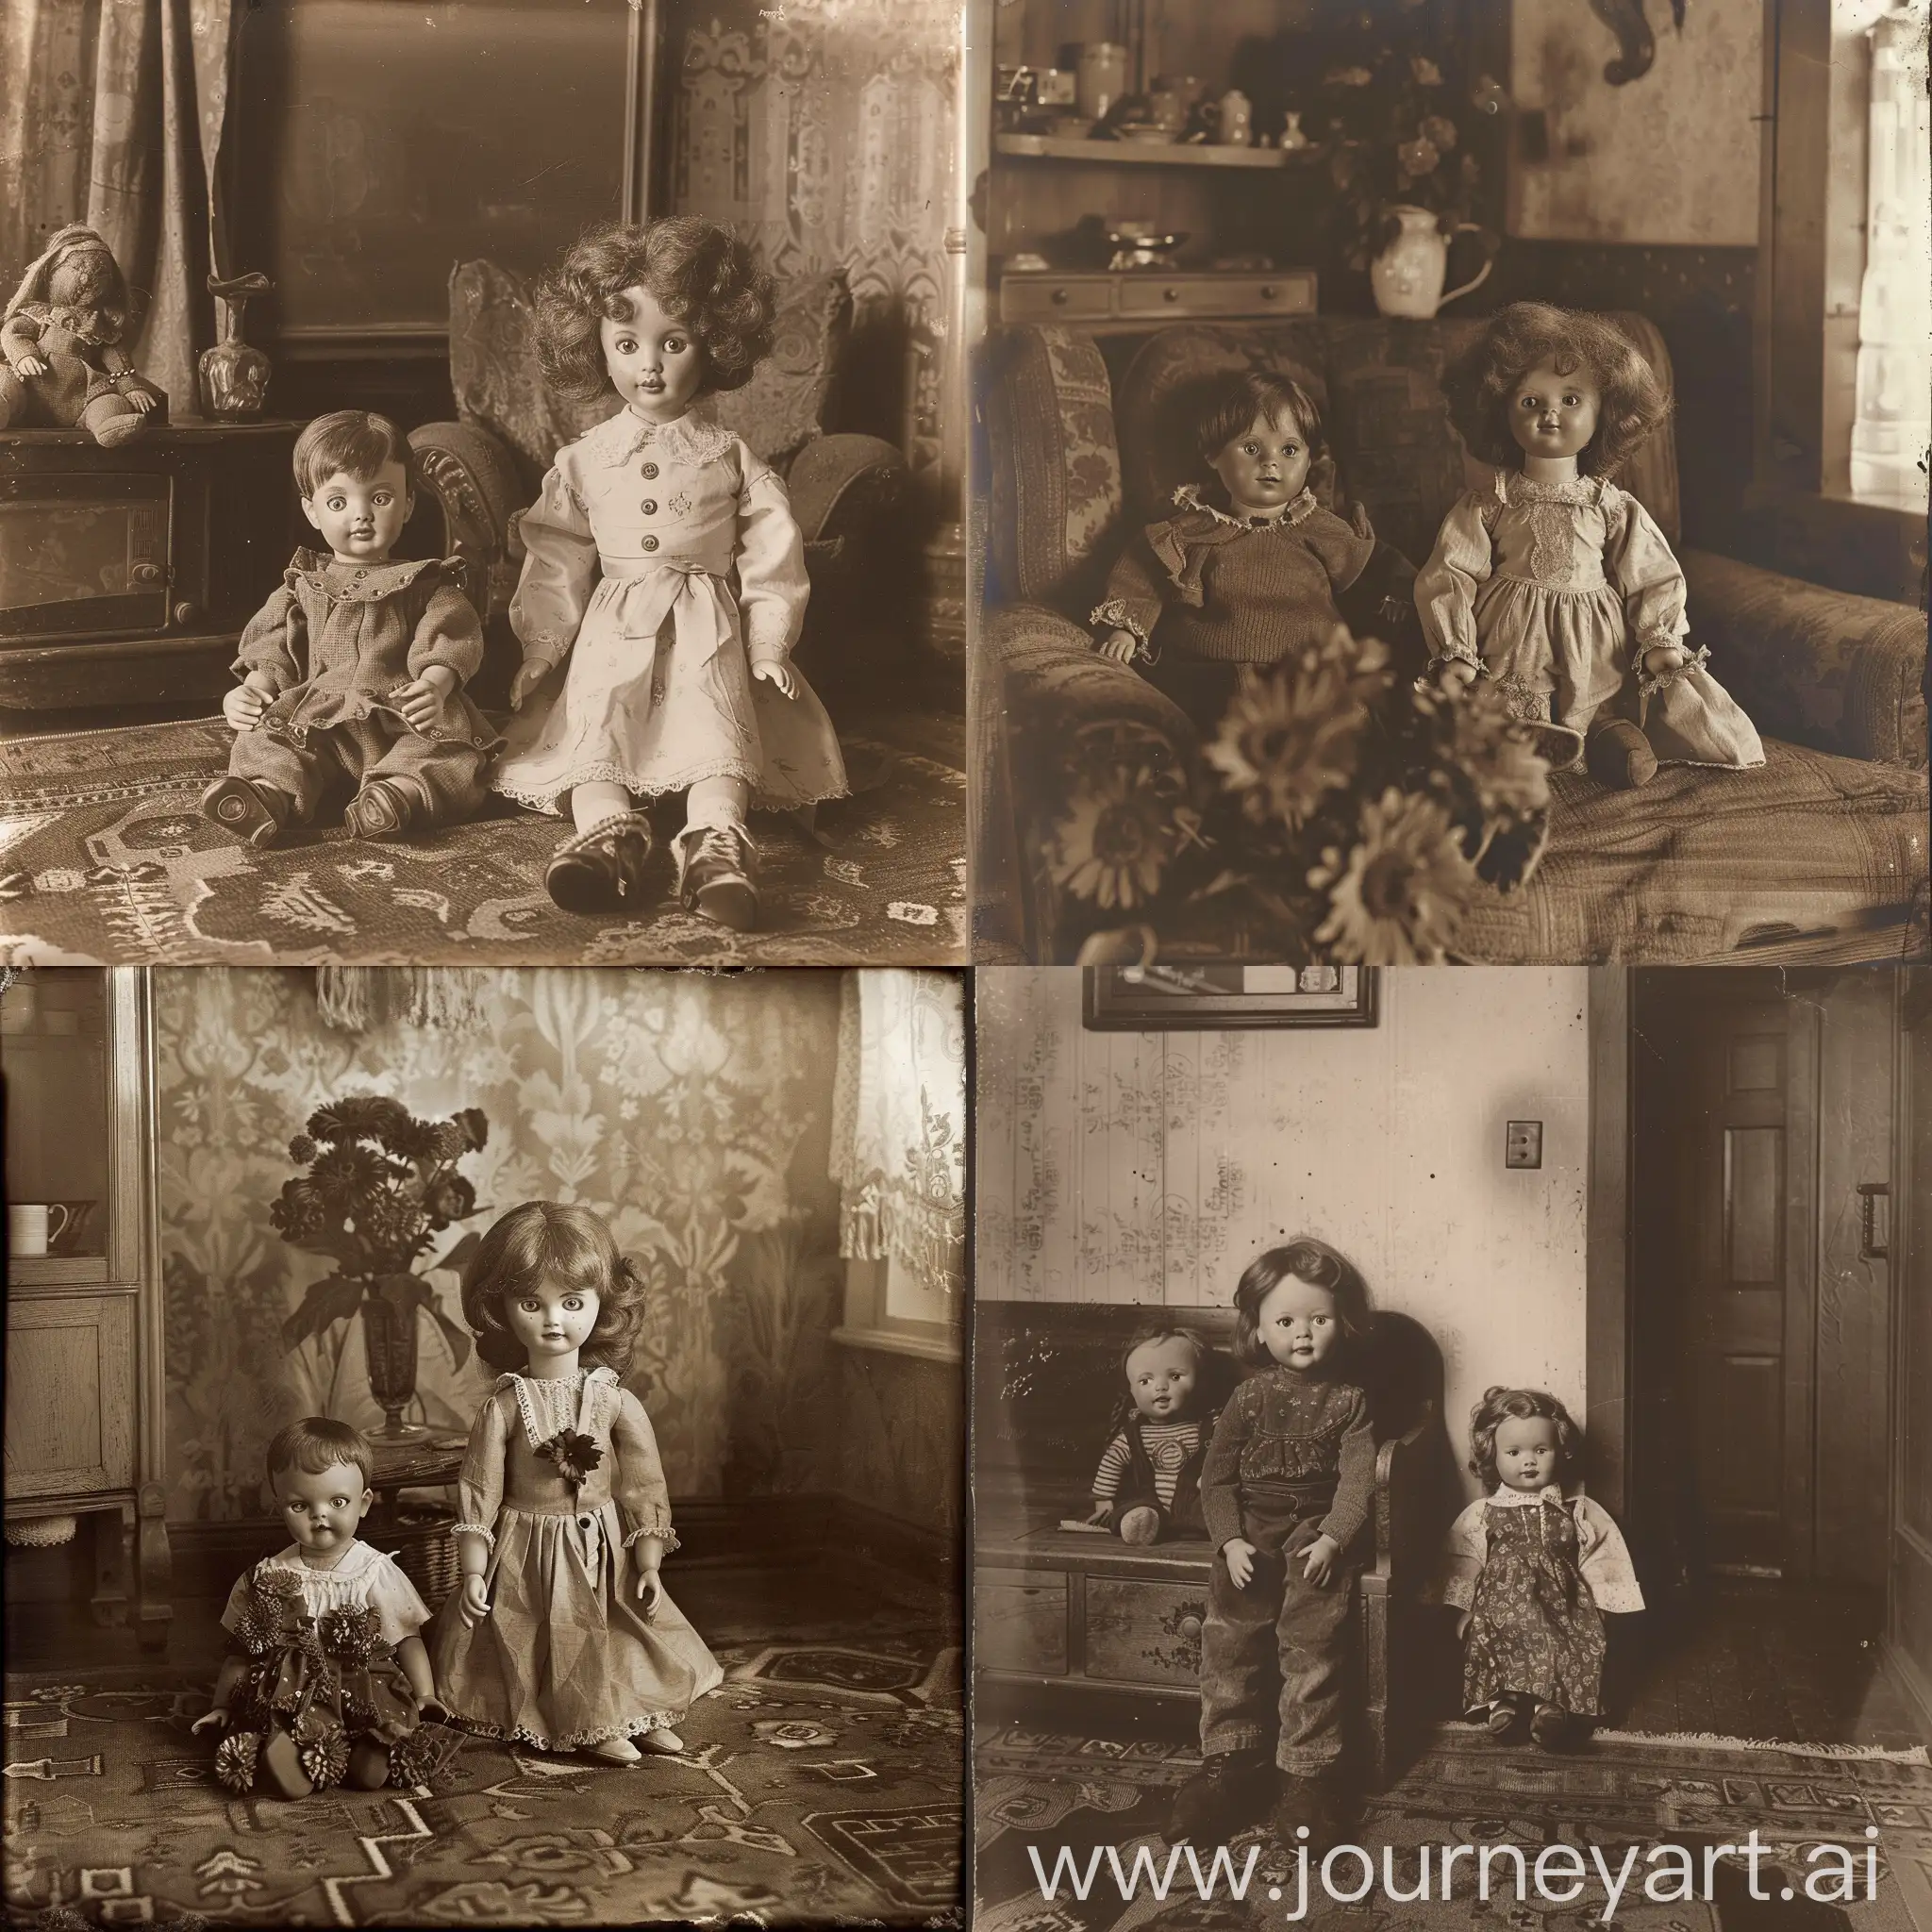 Photograph with a vintage and slightly eerie style, like a sepia photograph of a doll in a 1920s room. The image should convey a sense of mystery and slight discomfort, as if there is something sinister behind the seemingly innocent appearance of the scene. There is a child next to the doll.